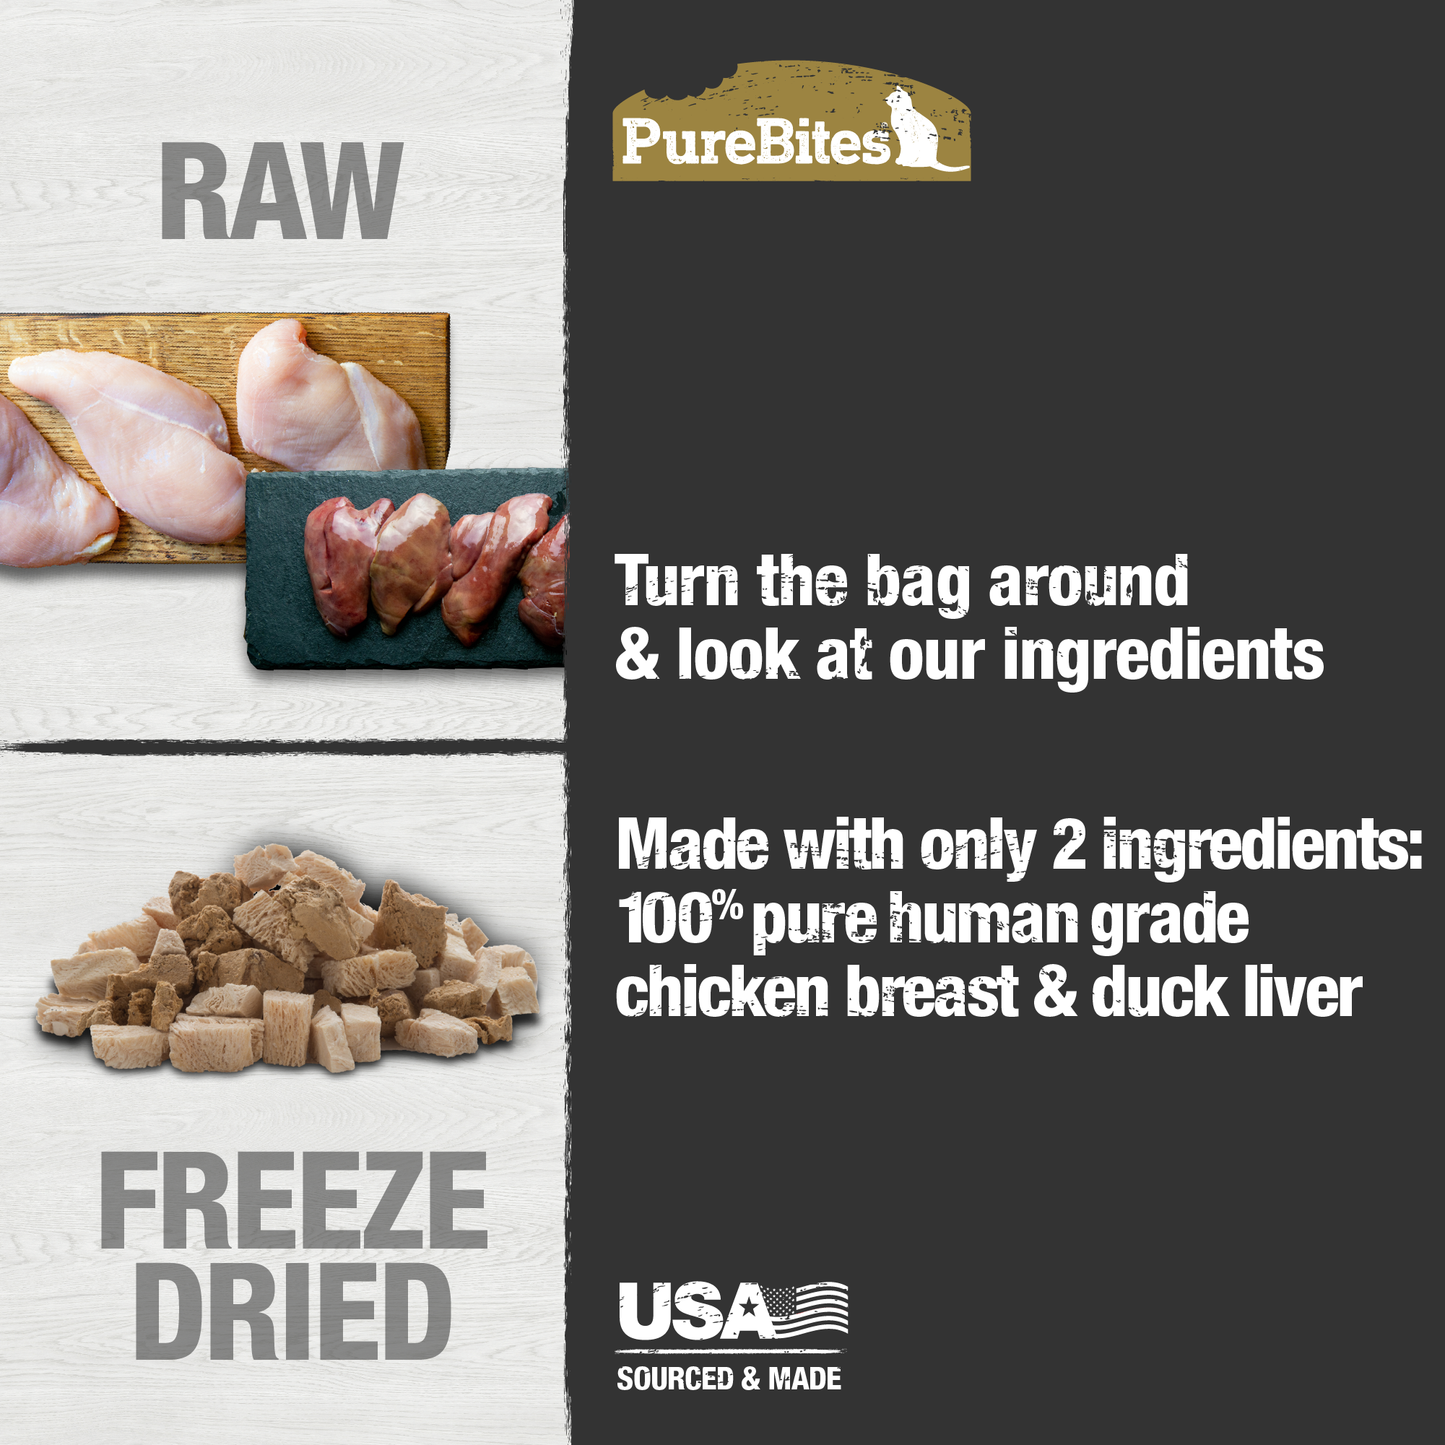 Made with only 1 Ingredient you can read, pronounce, and trust: USA sourced human grade chicken breast & duck liver.